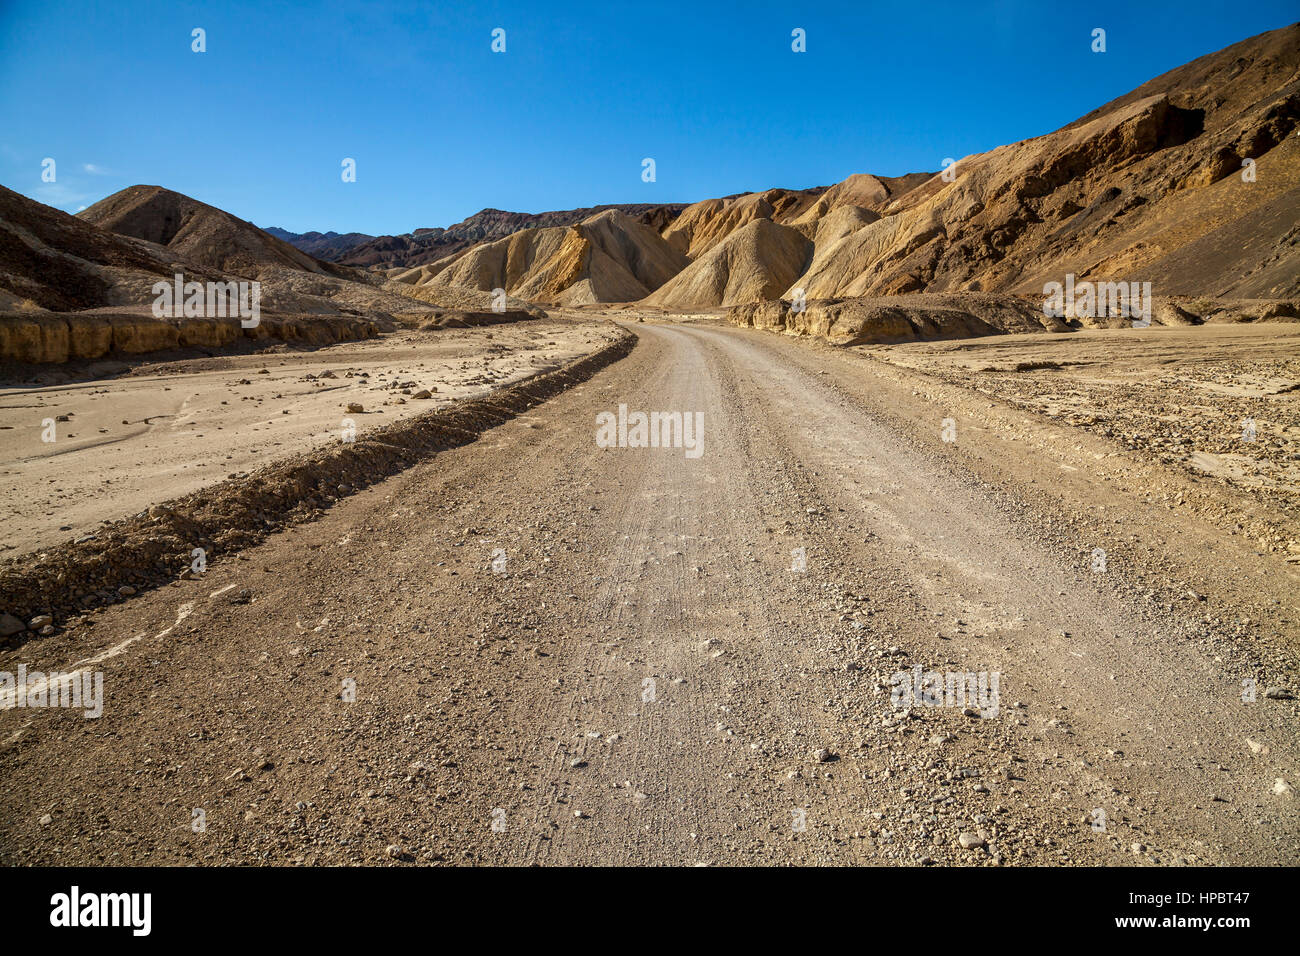 Dirt road in Death Valley National Park, California, USA Stock Photo